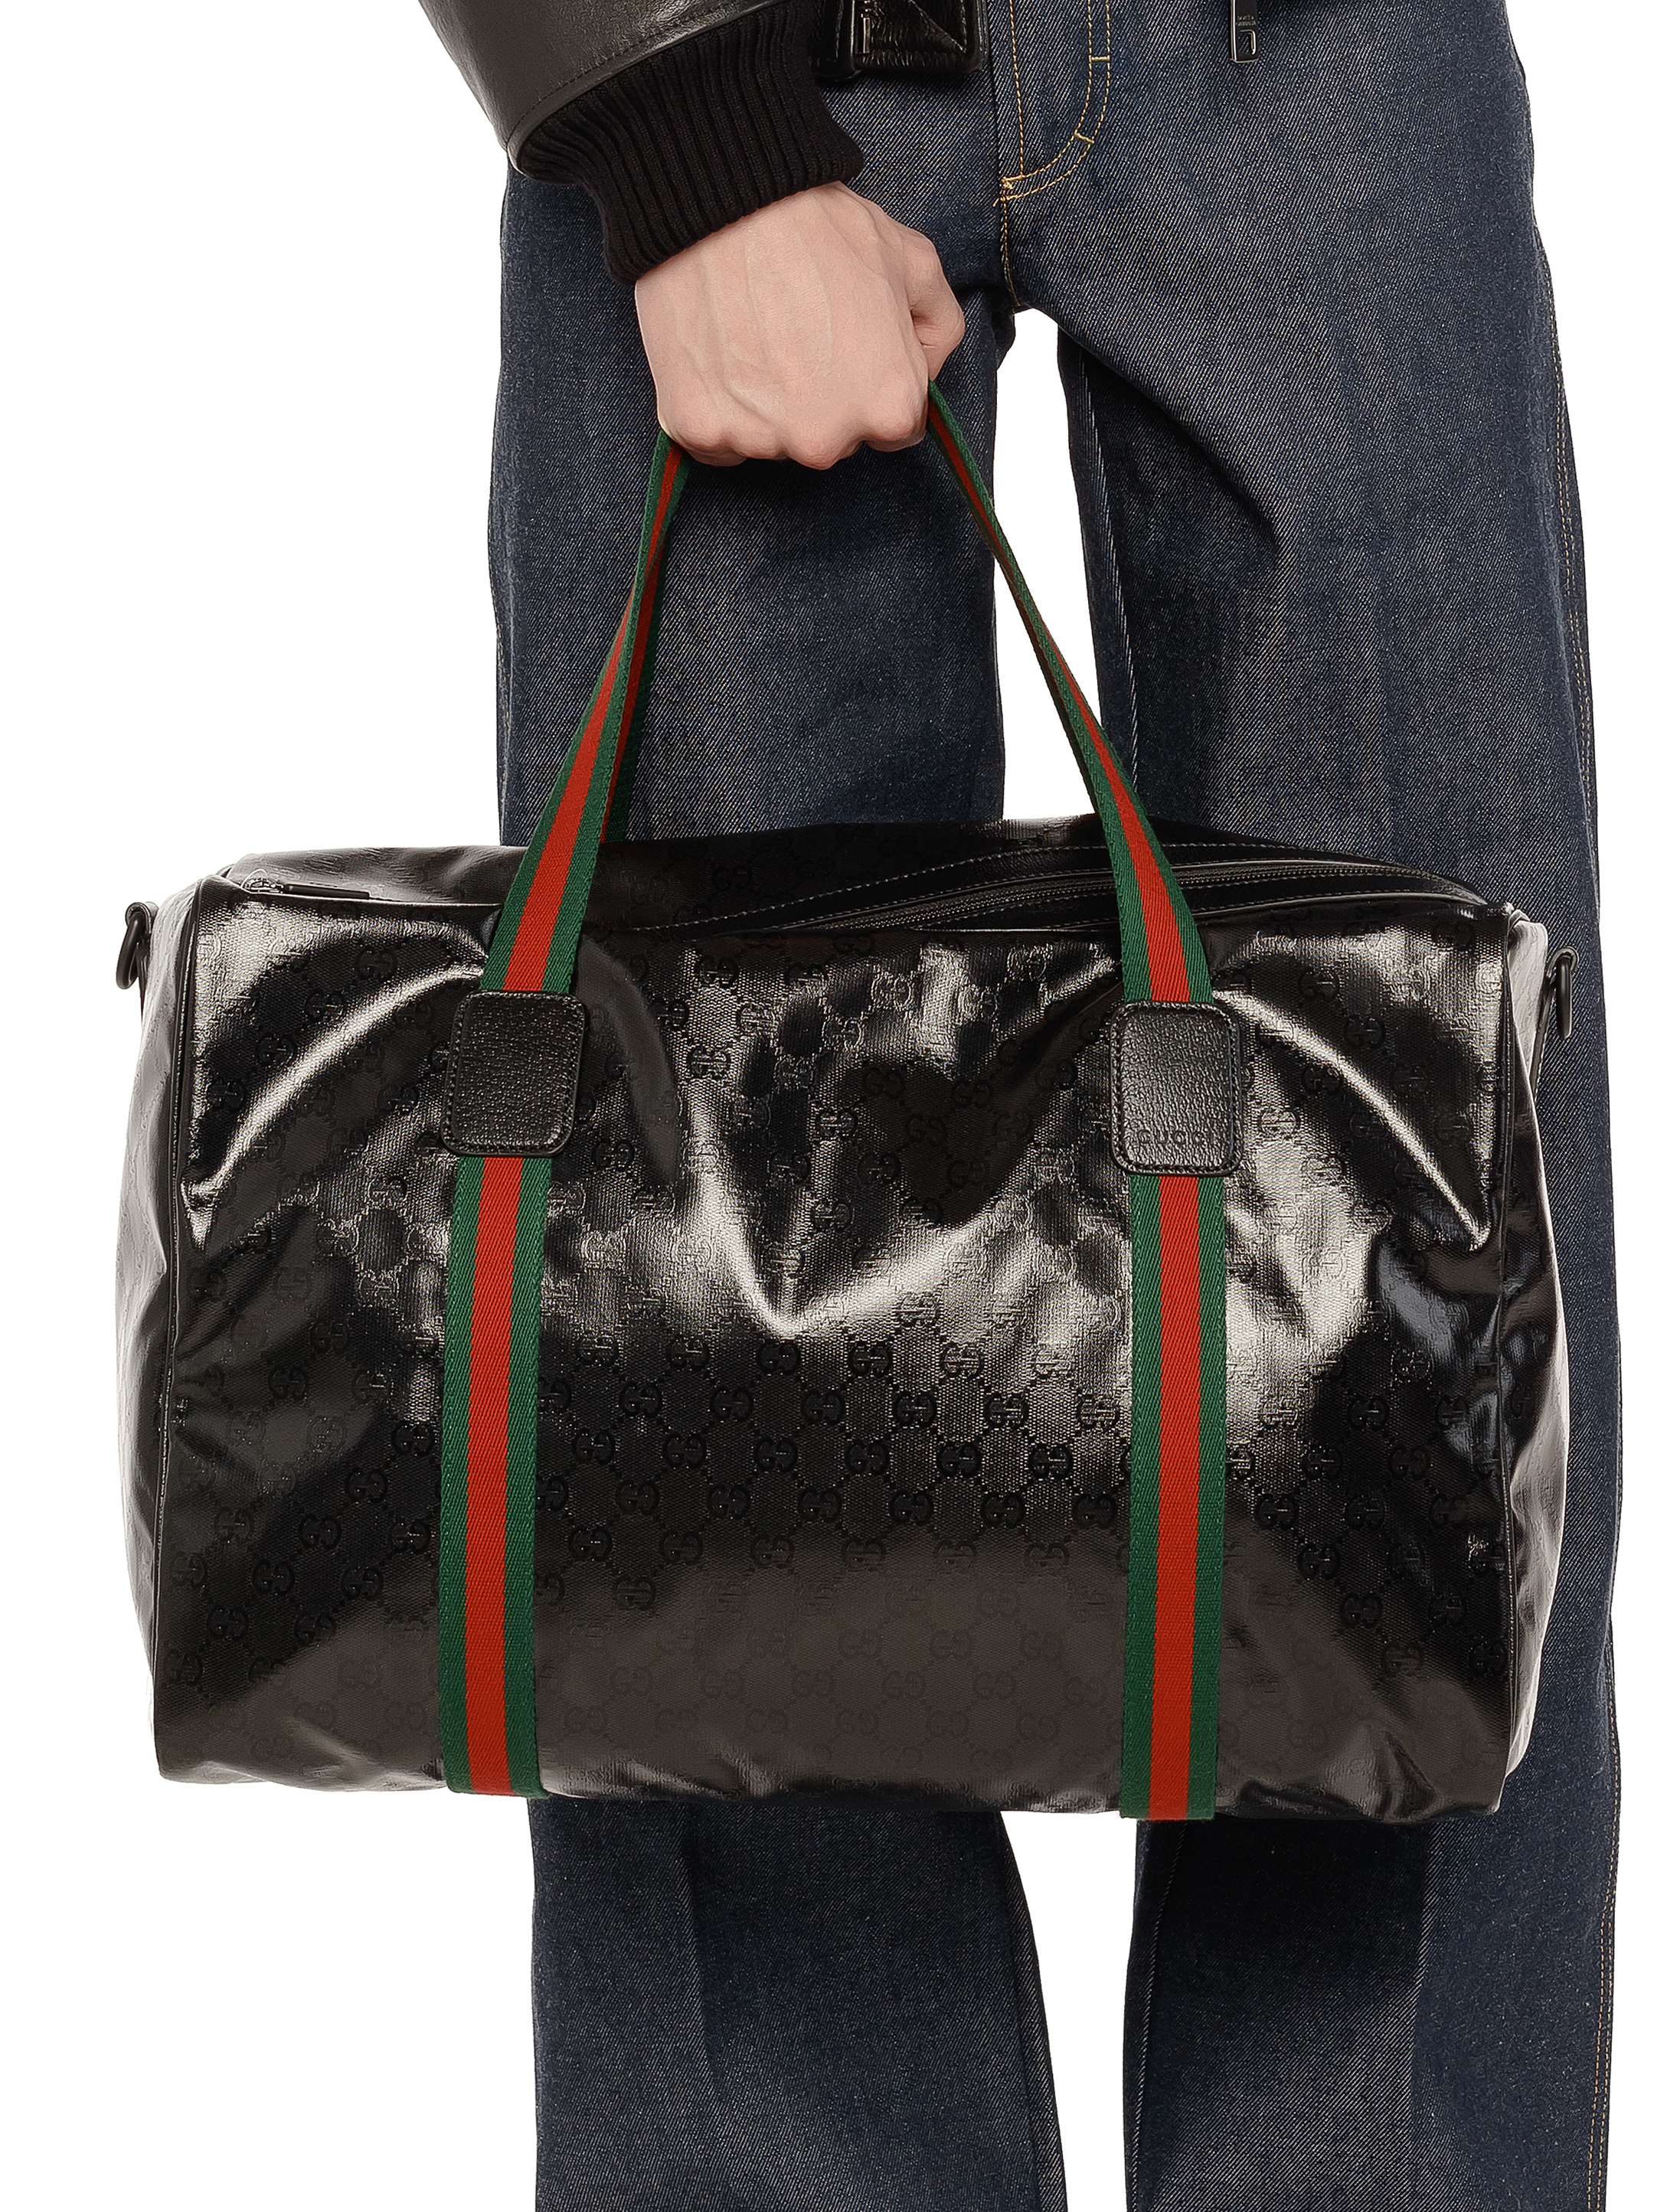 GG embossed leather duffle bag in black - Gucci | Mytheresa